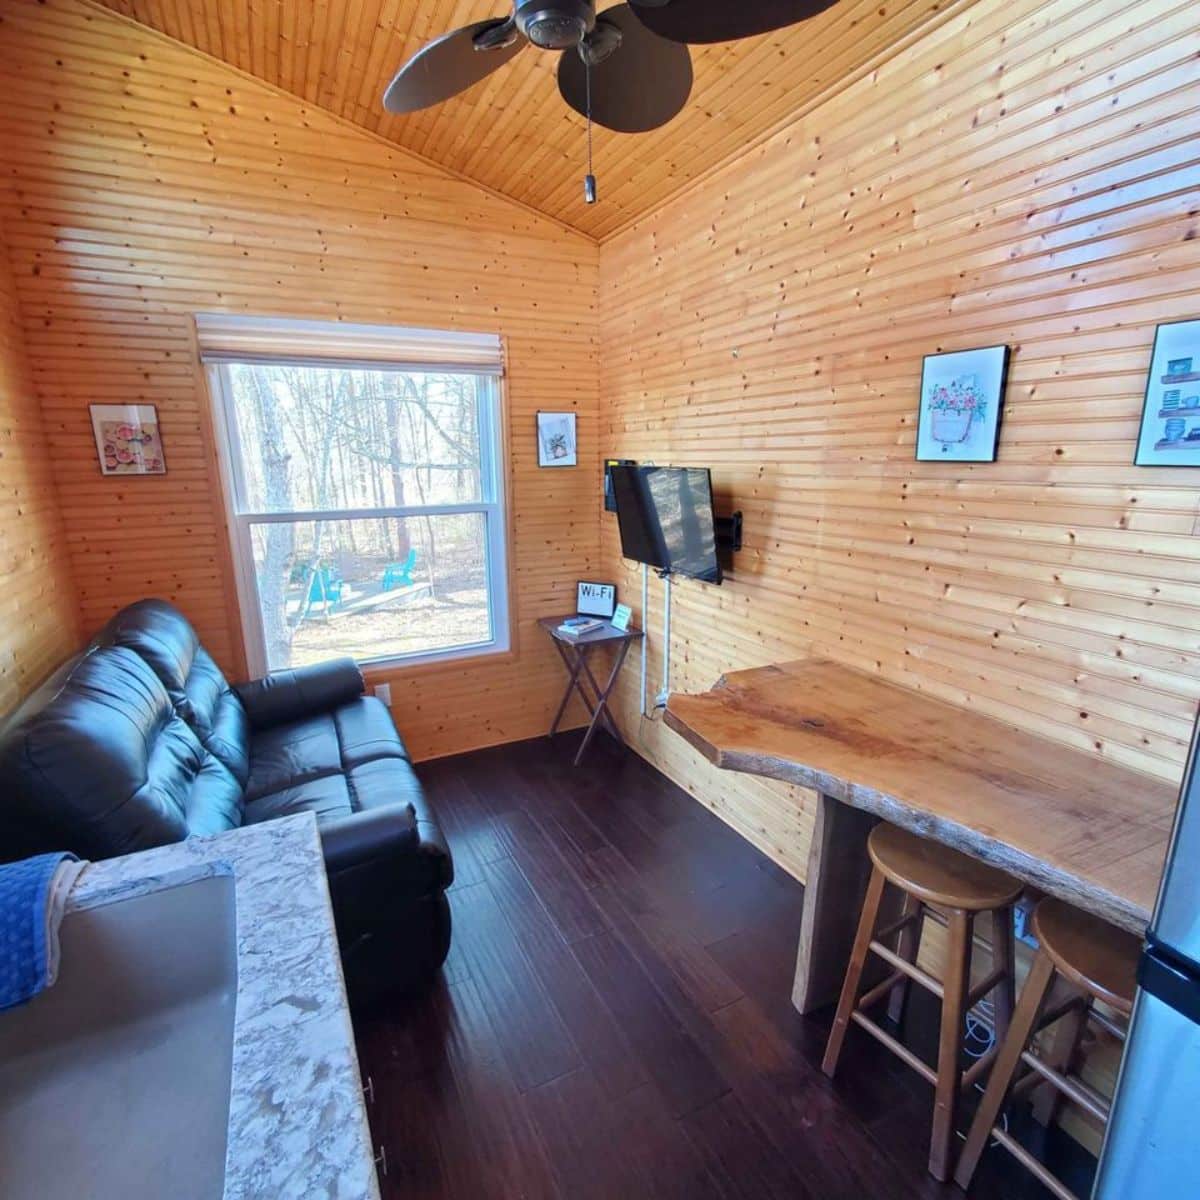 living area of tiny home with downstairs bedroom